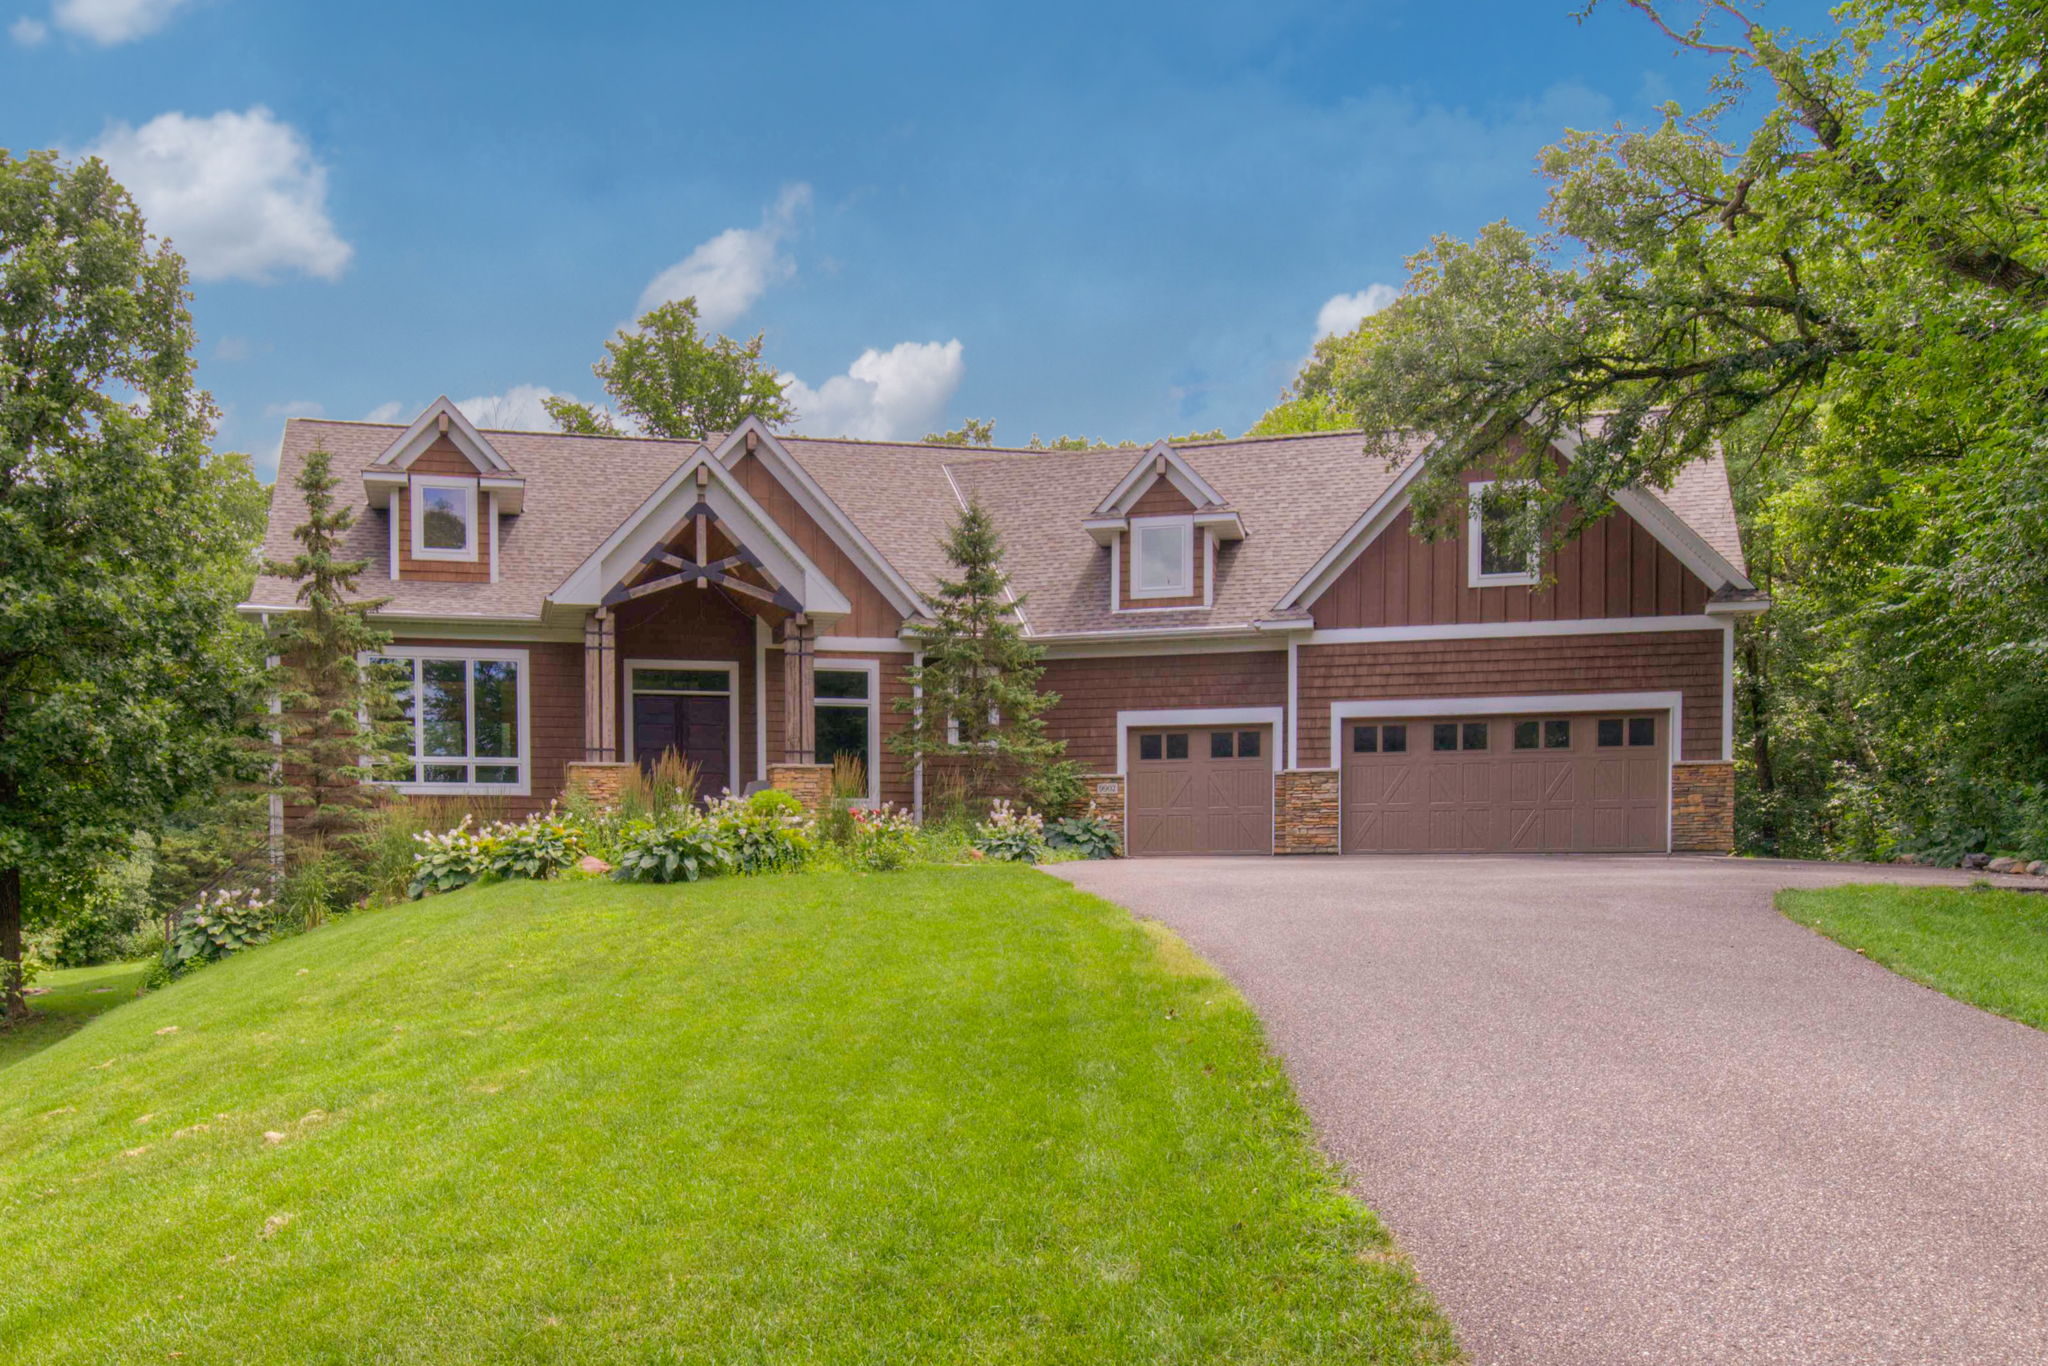  9902 Adam Ave, Inver Grove Heights, MN 55077, US